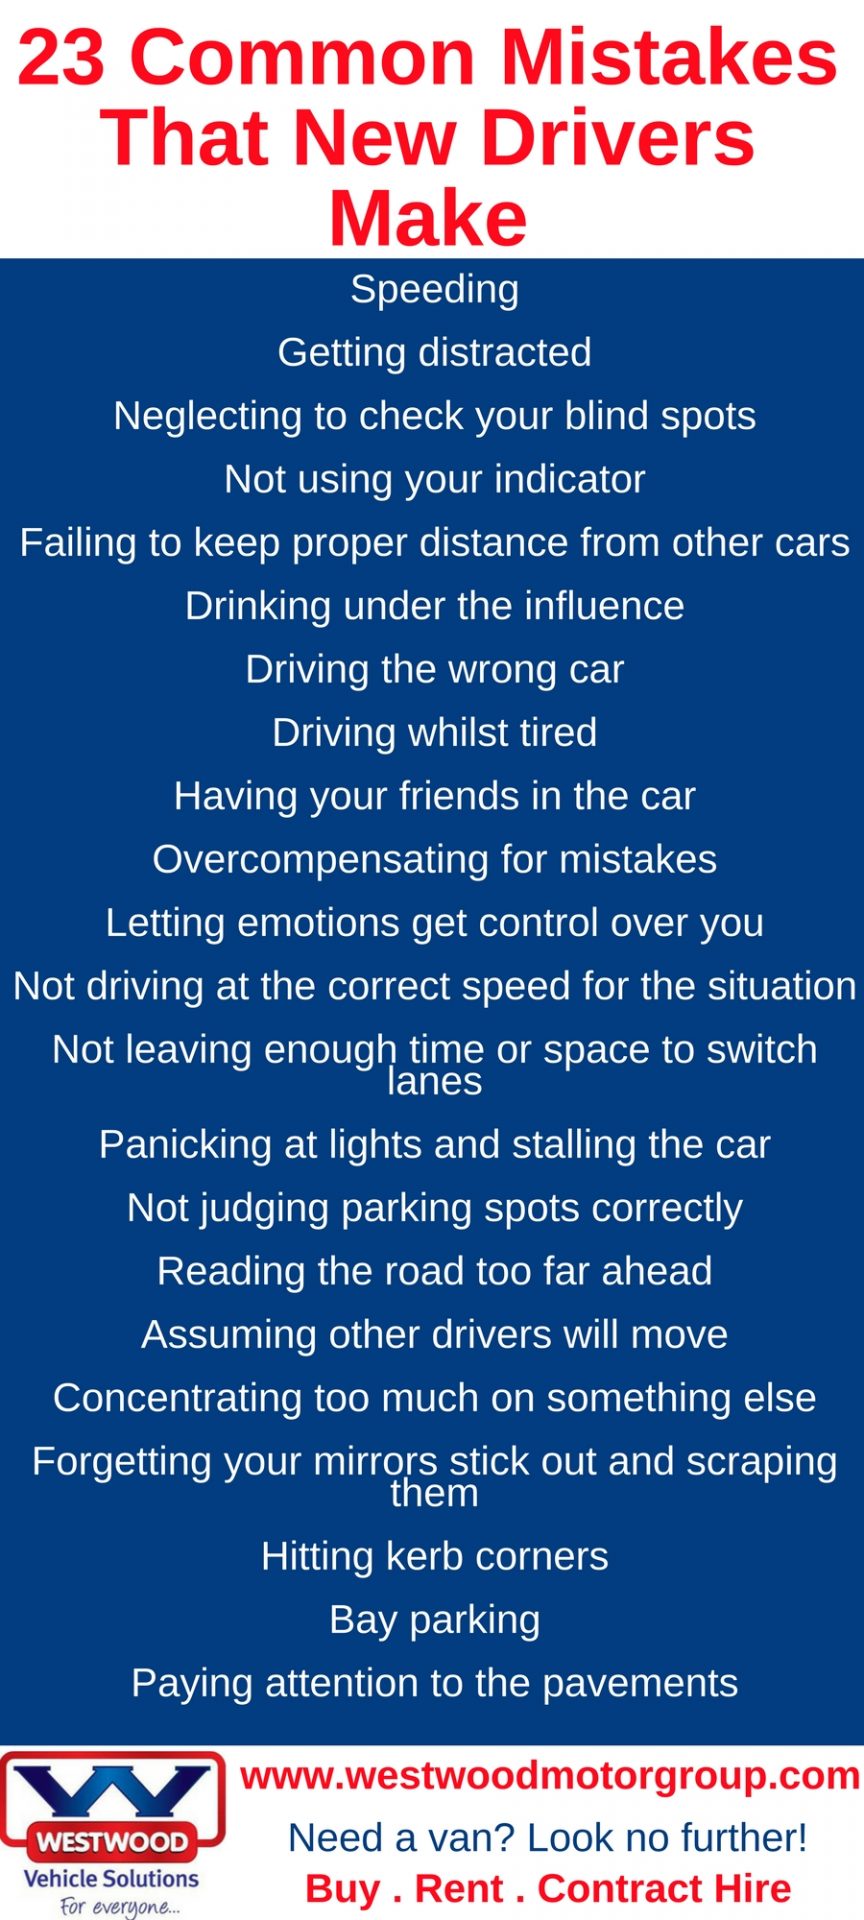 23 Common Mistakes New Drivers Make - A Simple List